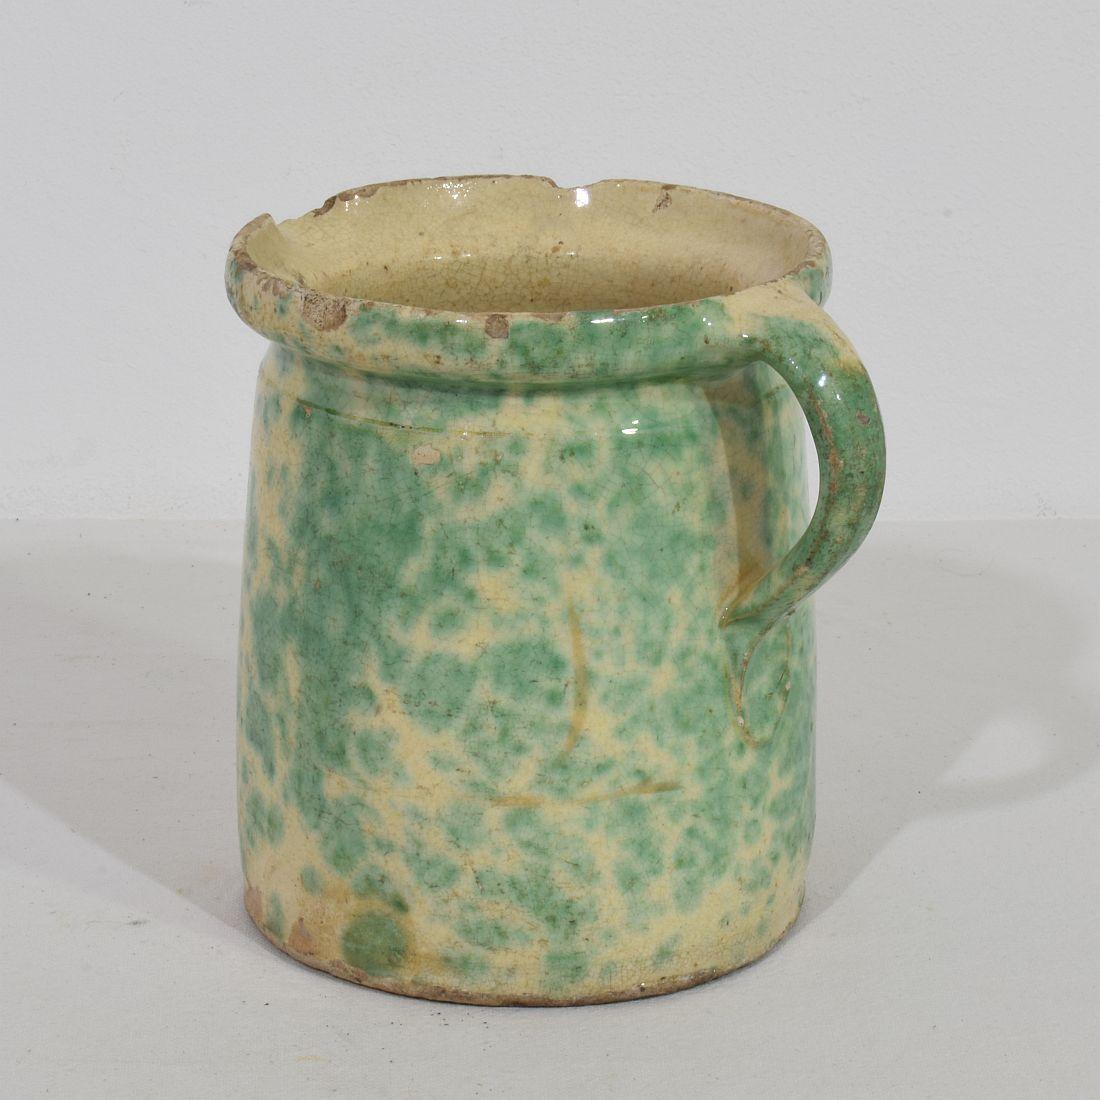 Wonderful piece of Alsace pottery with a very rare green glaze,
France, circa 1850-1900.
Good but weathered condition.